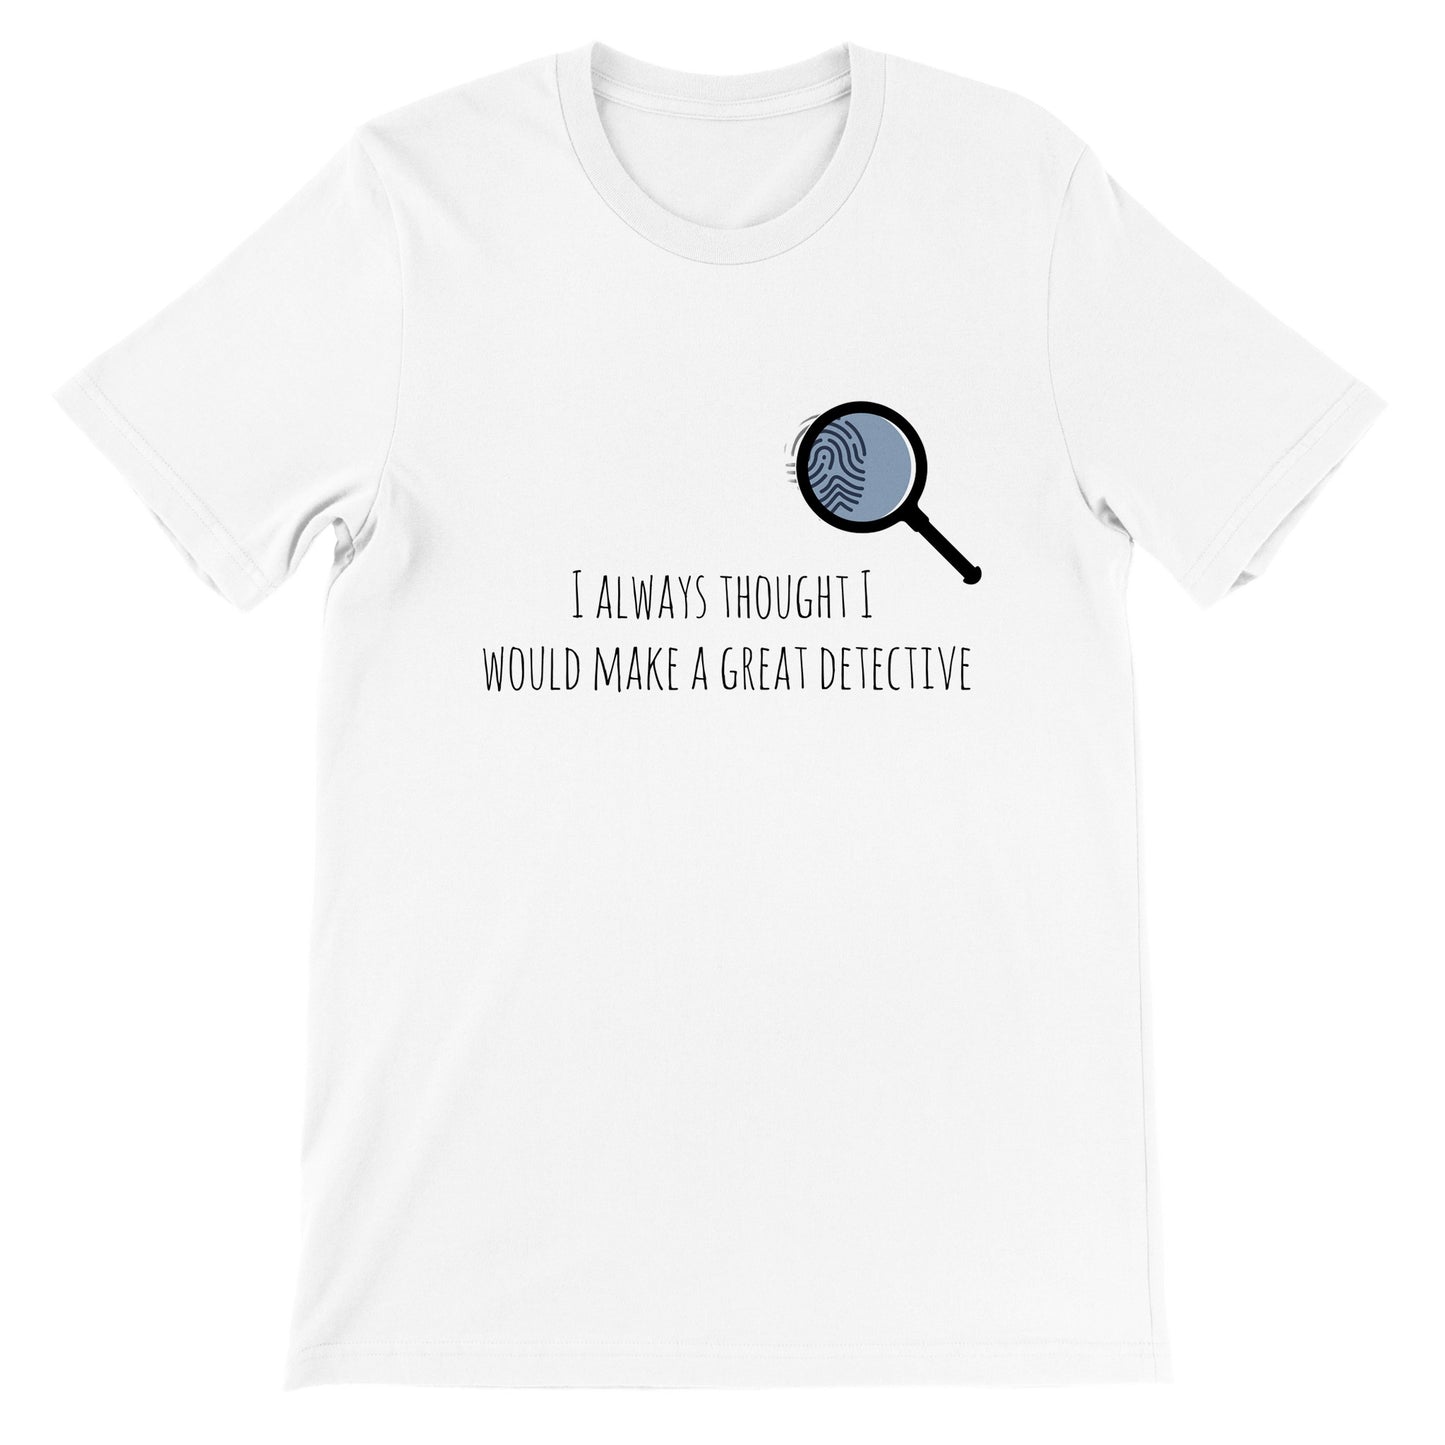 Short-Sleeve Unisex Crewneck T-shirt - I Always Thought I Would Make A Great Detective